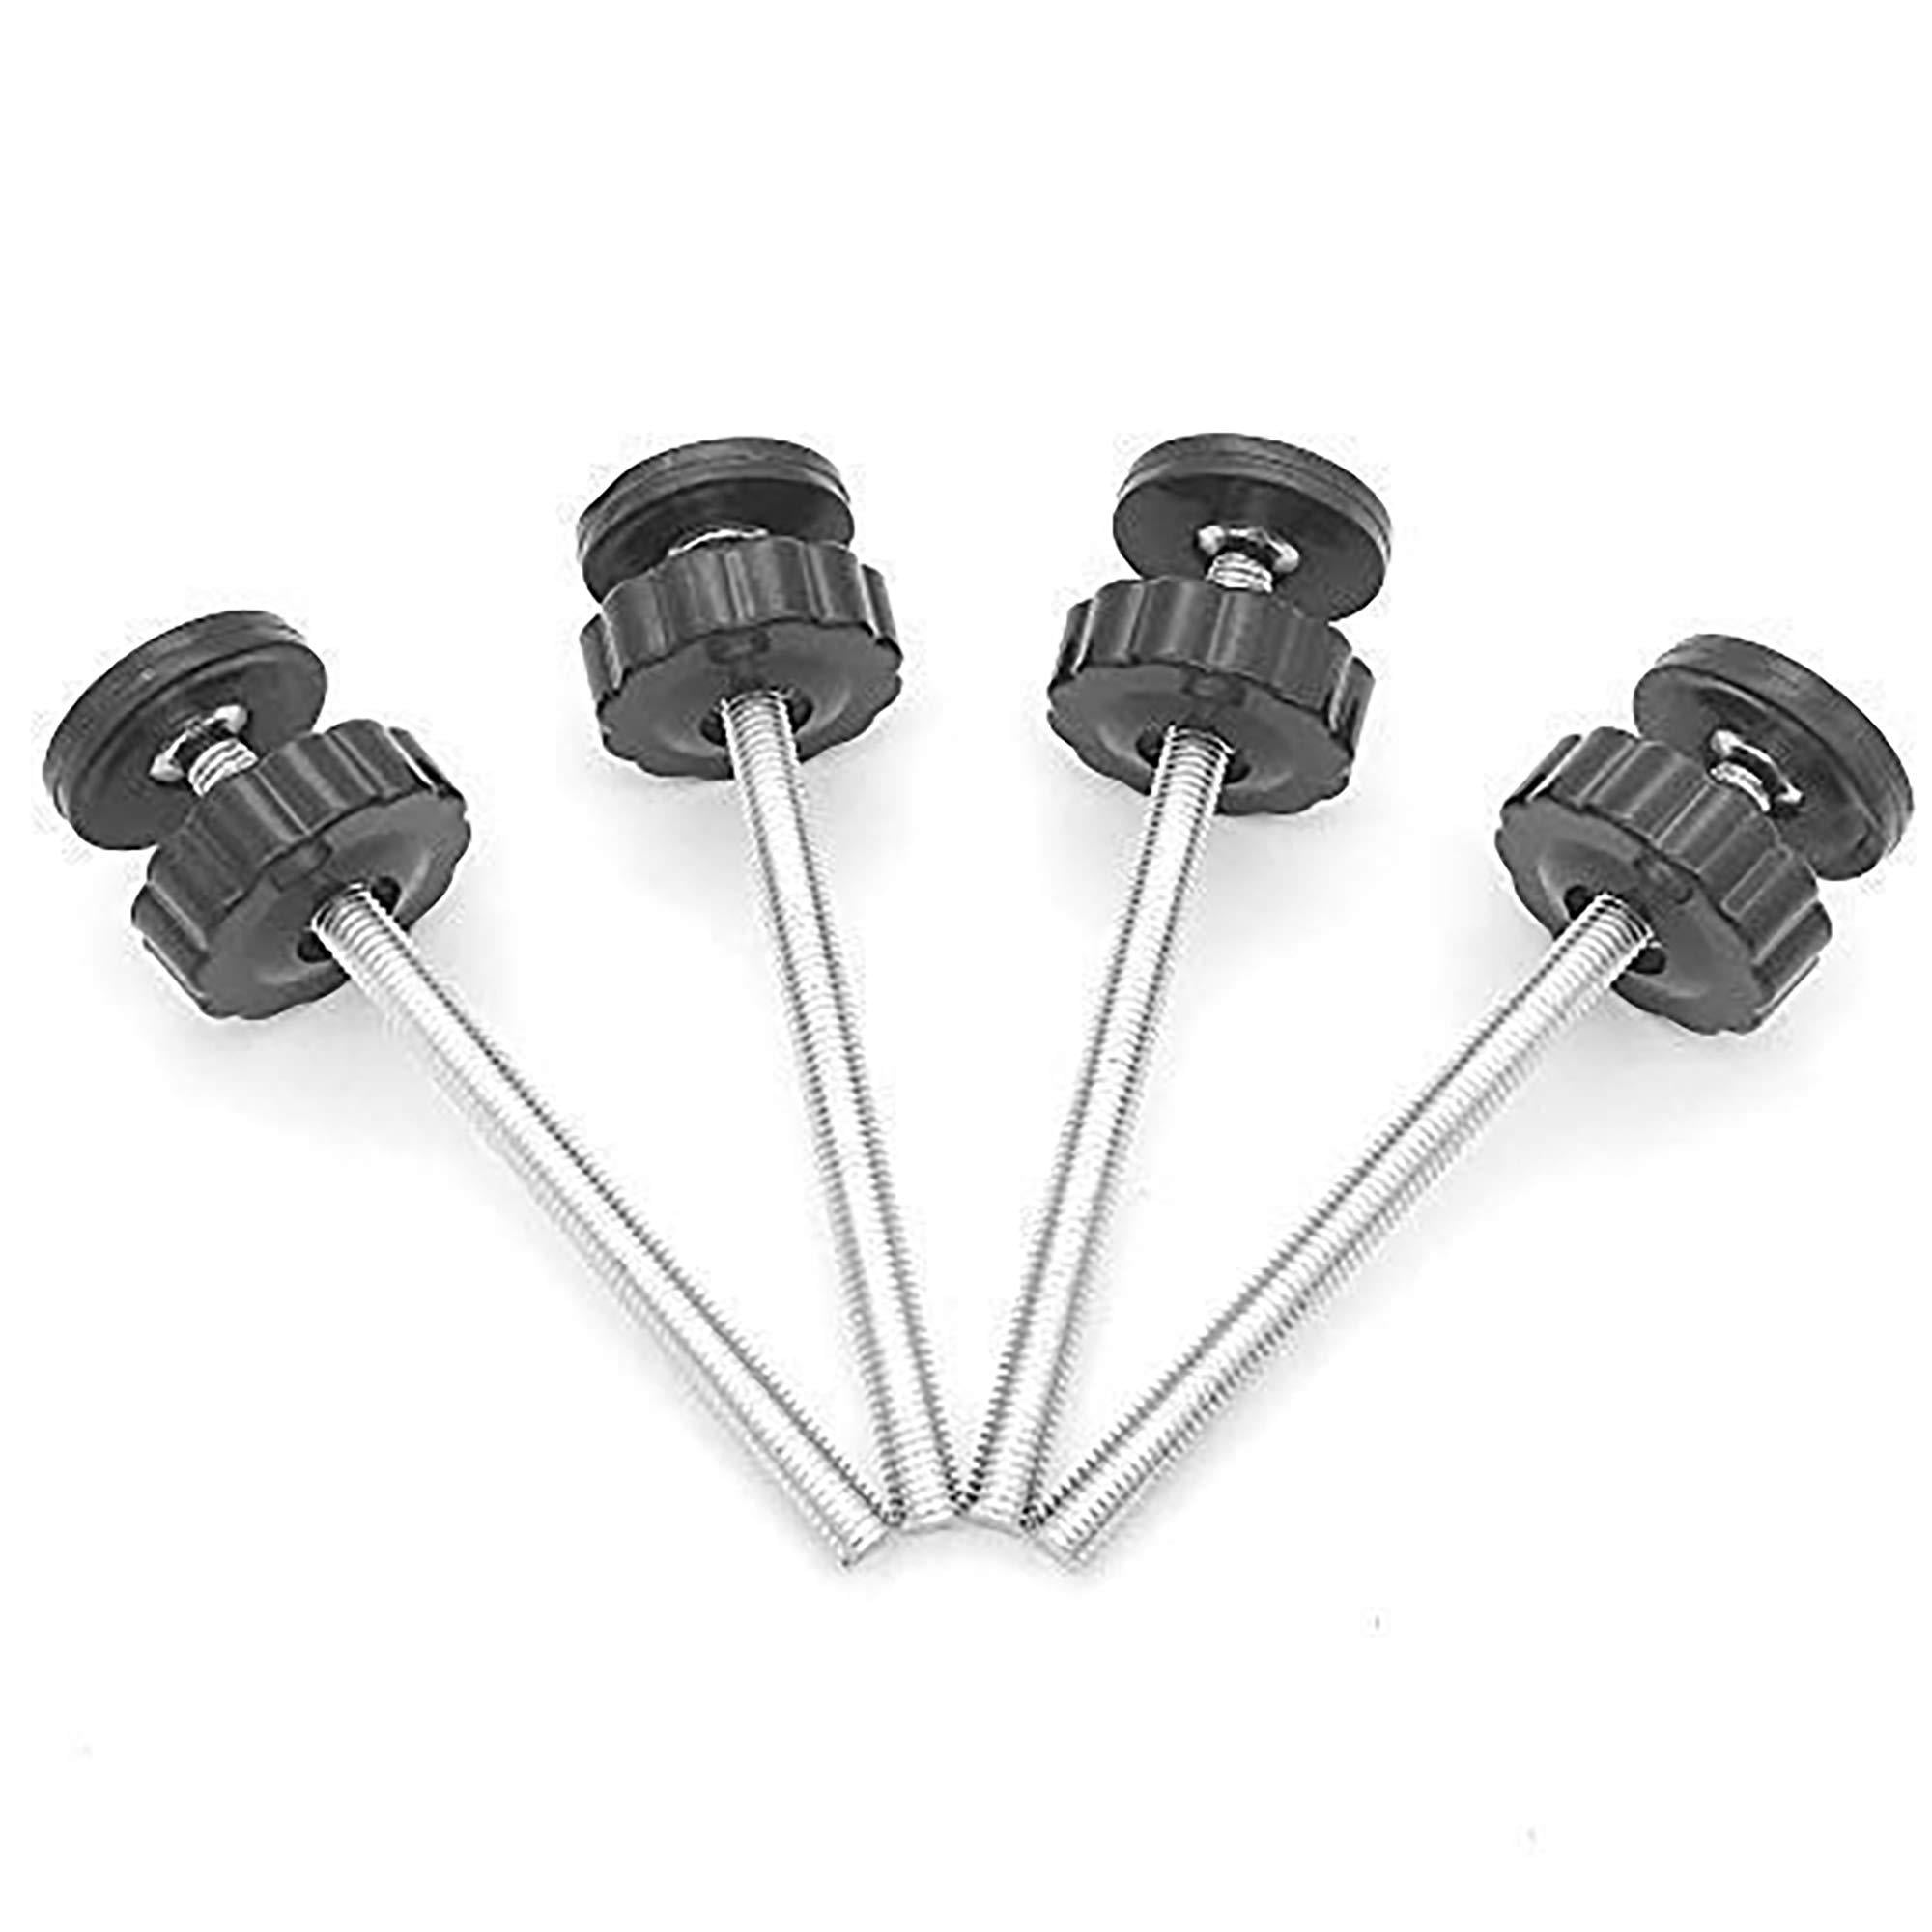 4PCS/lot Pressure Mounted Baby Gates Threaded Spindle Rods Walk Thru Screw Tool 